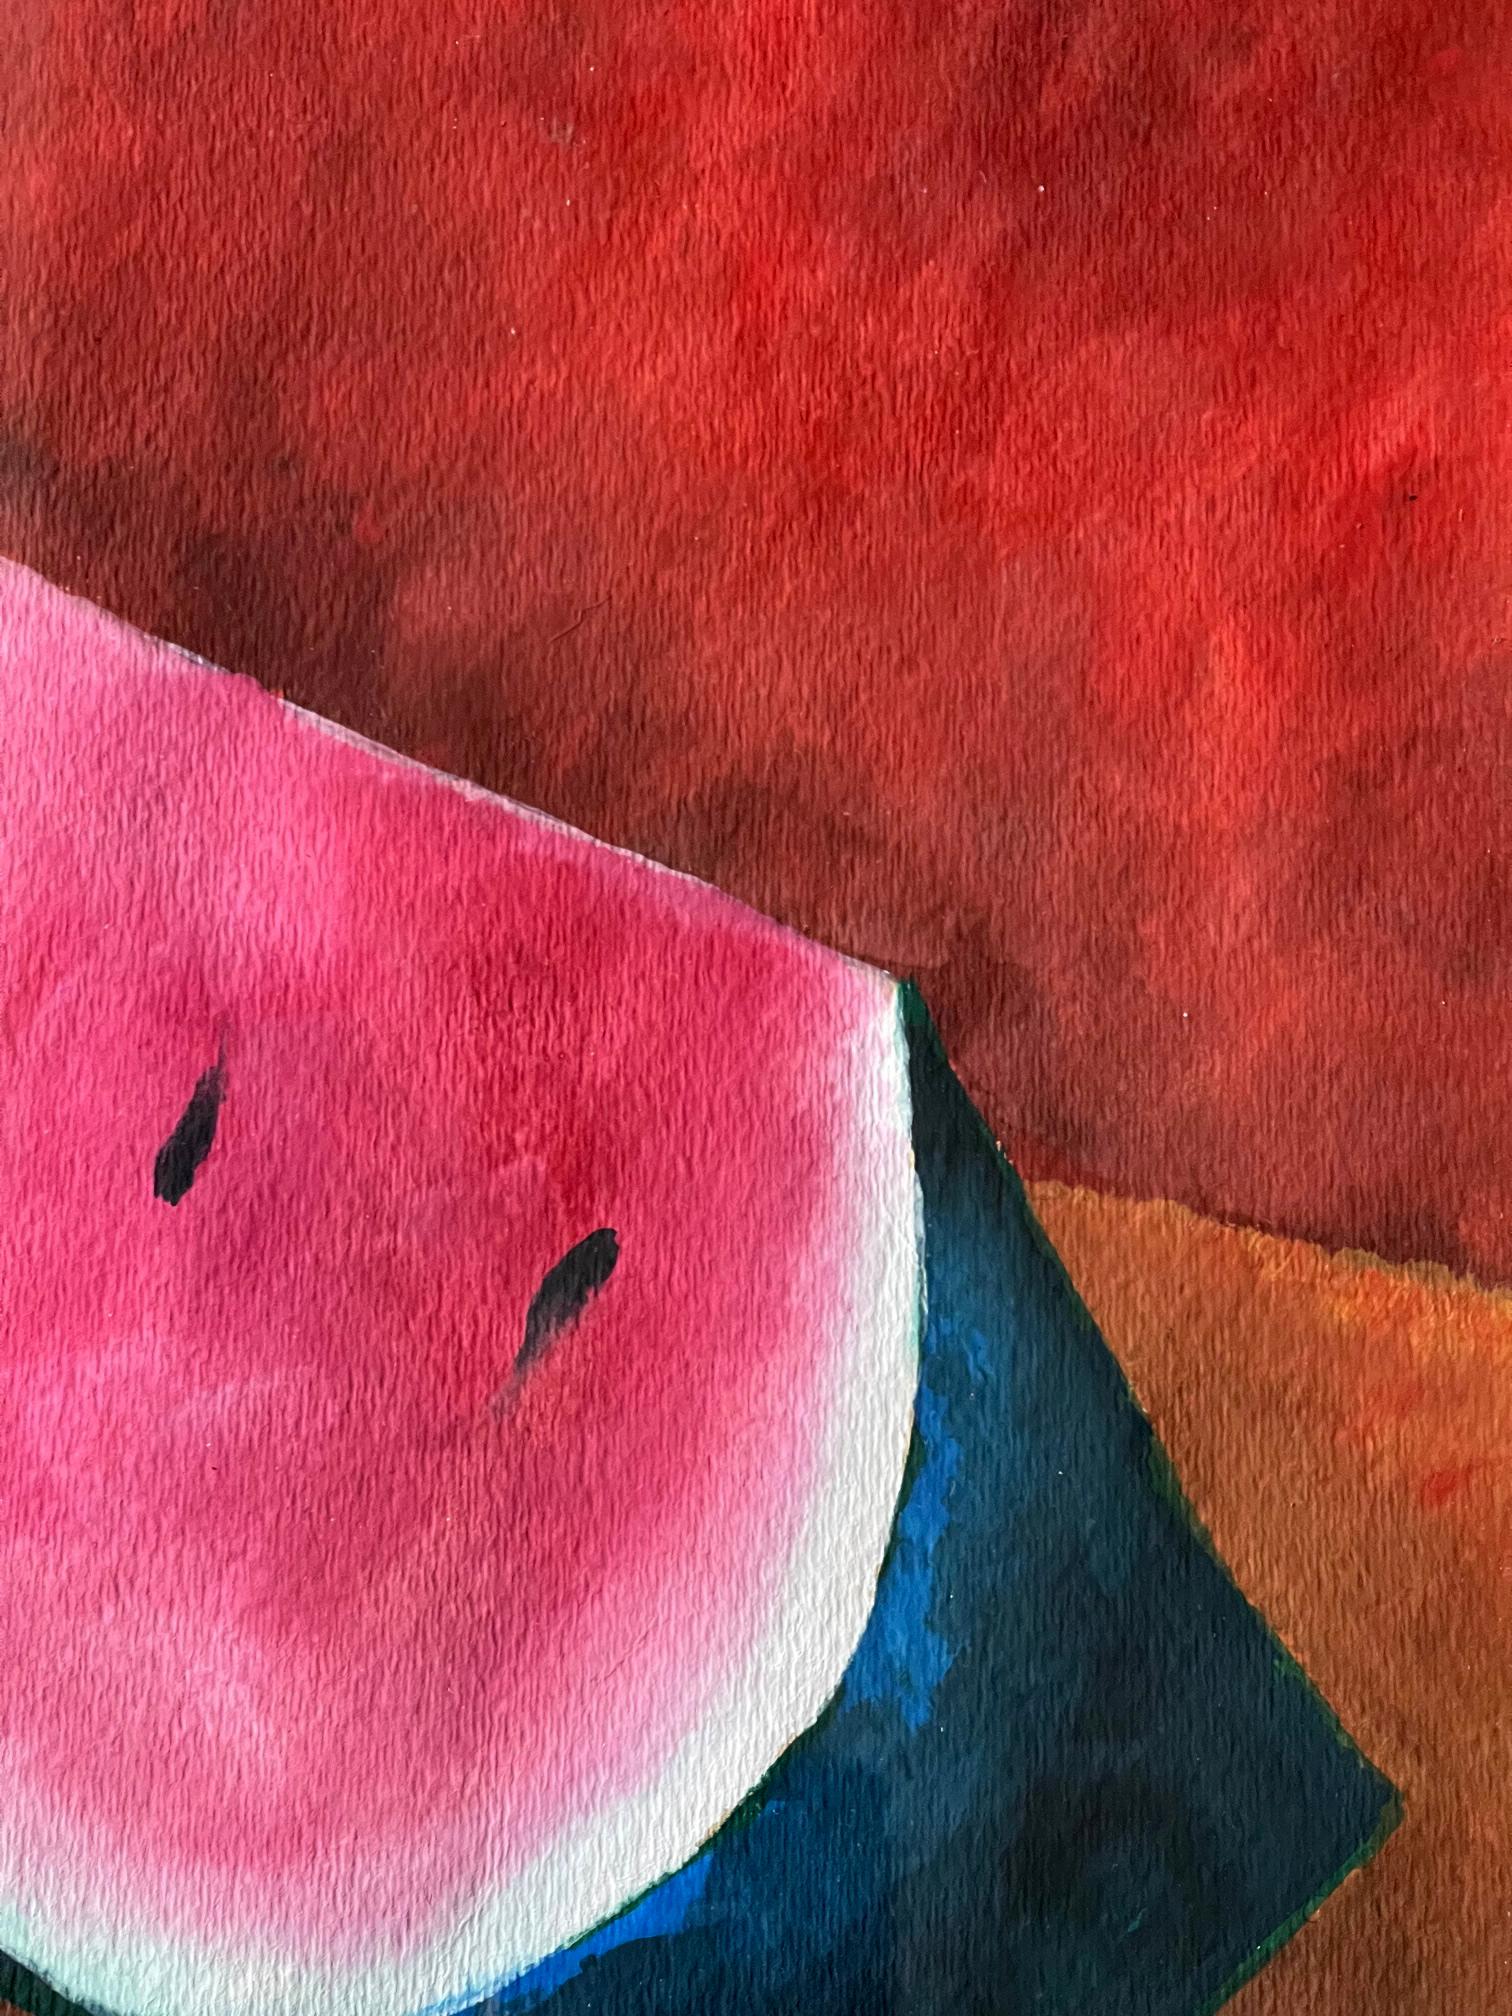 Mid-20th Century Framed Mexican Watercolor on Paper Attributed to Rufino Tamayo For Sale